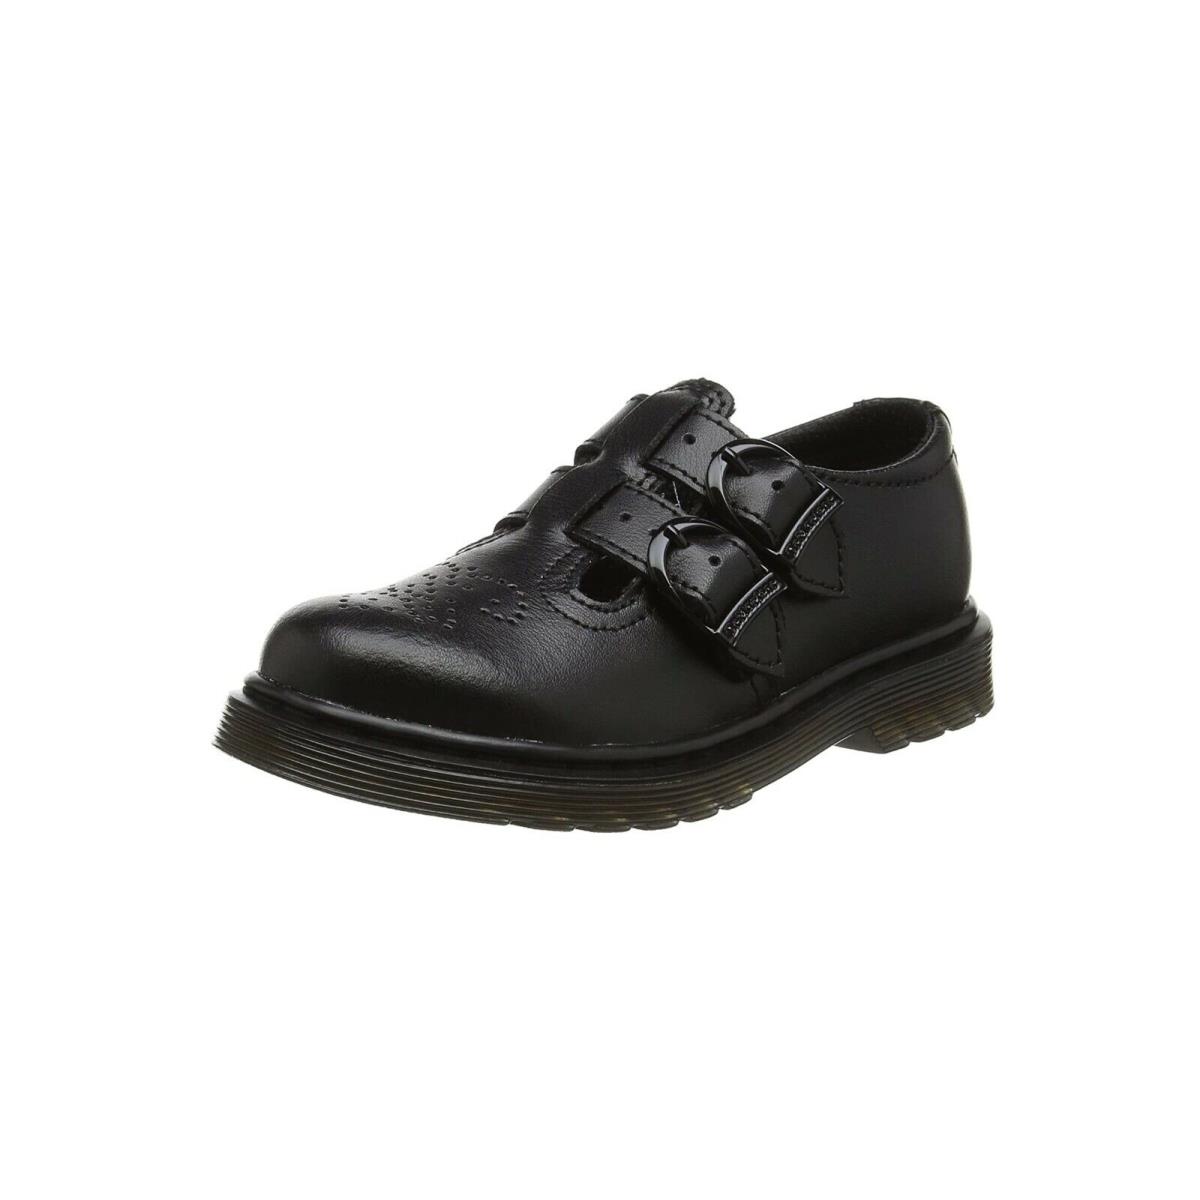 Dr Martens Mary Jane 2 Straps Black Leather Youths Women Shoes Size 6